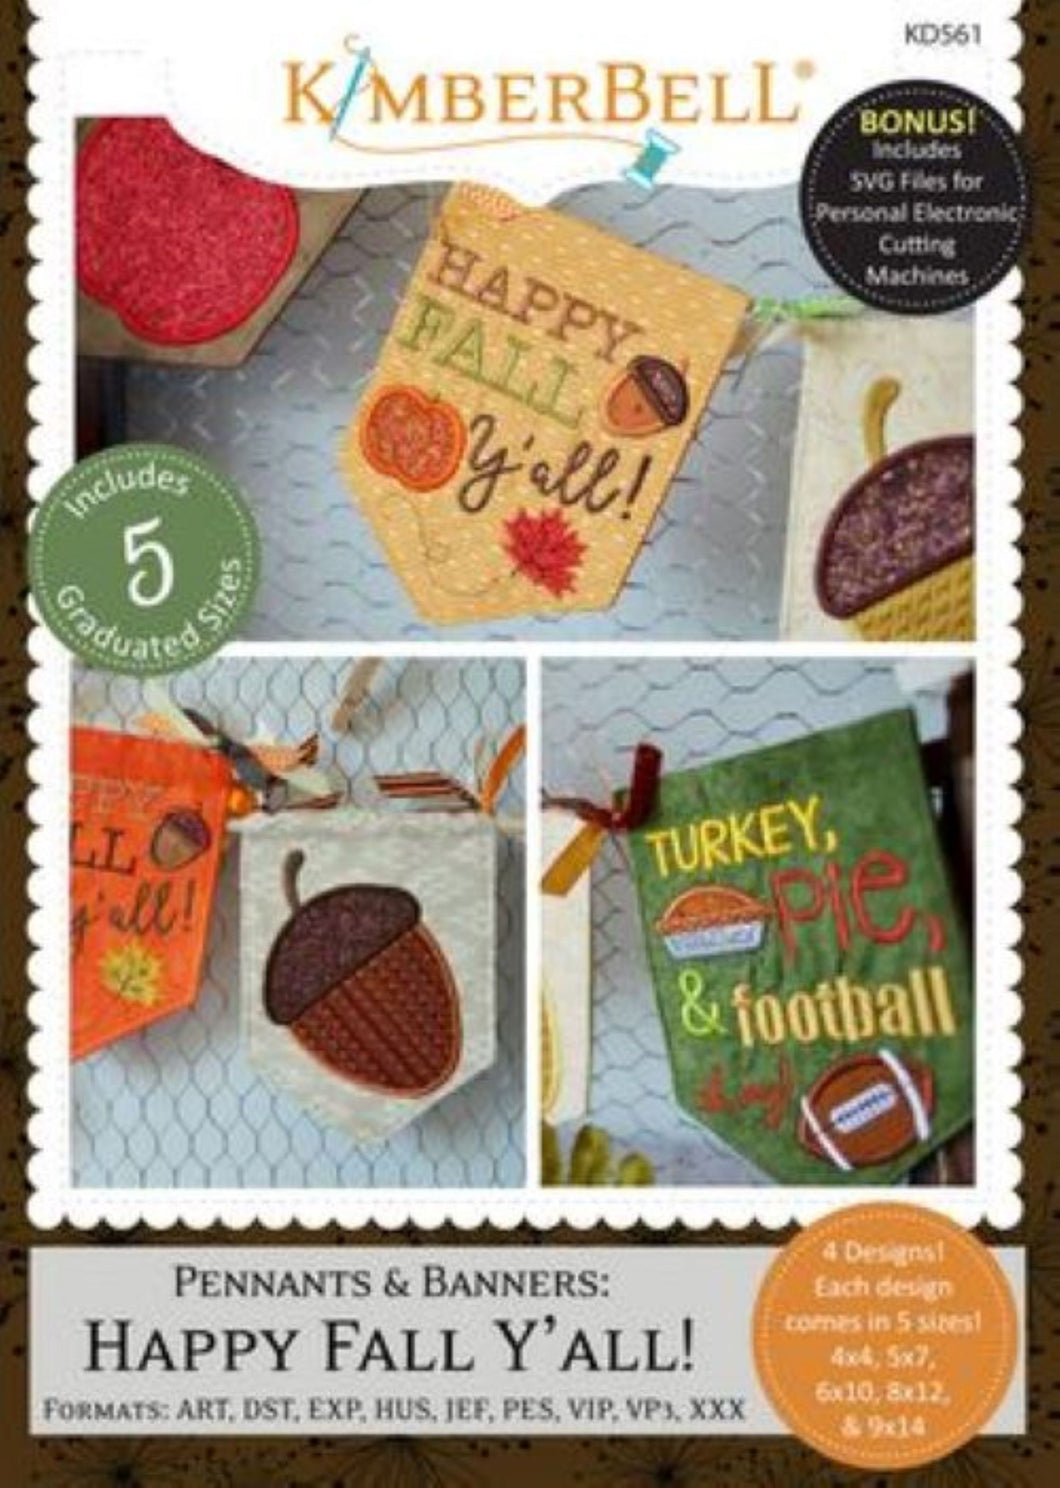 Pennants and Banners: Happy Fall Y'All Embroidery CD  by Kimberbell Stitch It Up VA